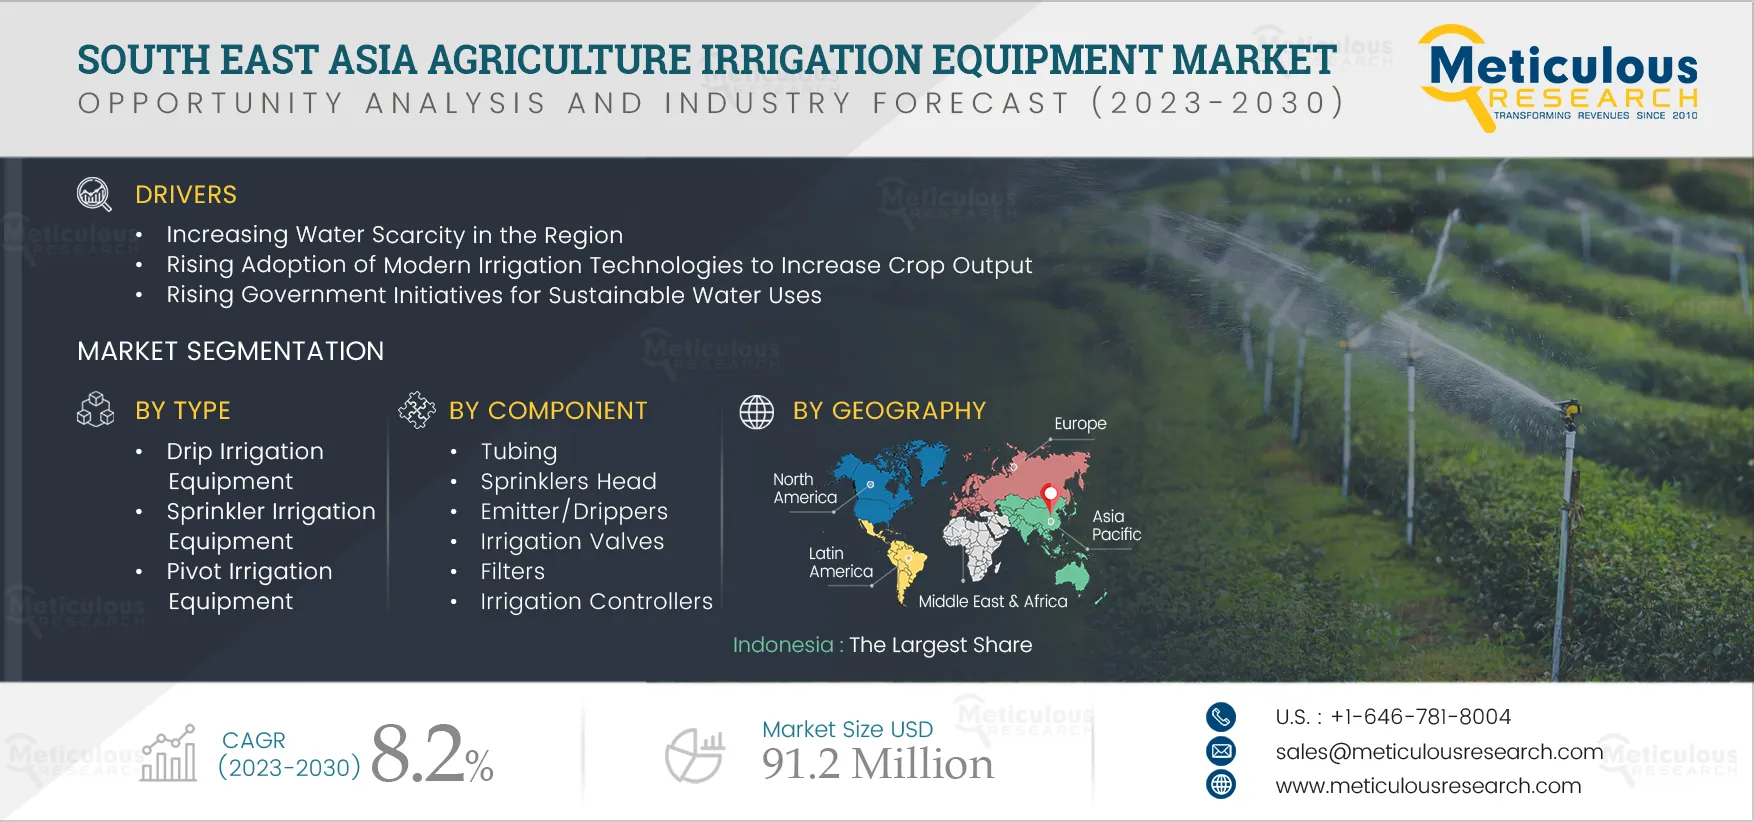 South East Asia Agriculture Irrigation Equipment Market